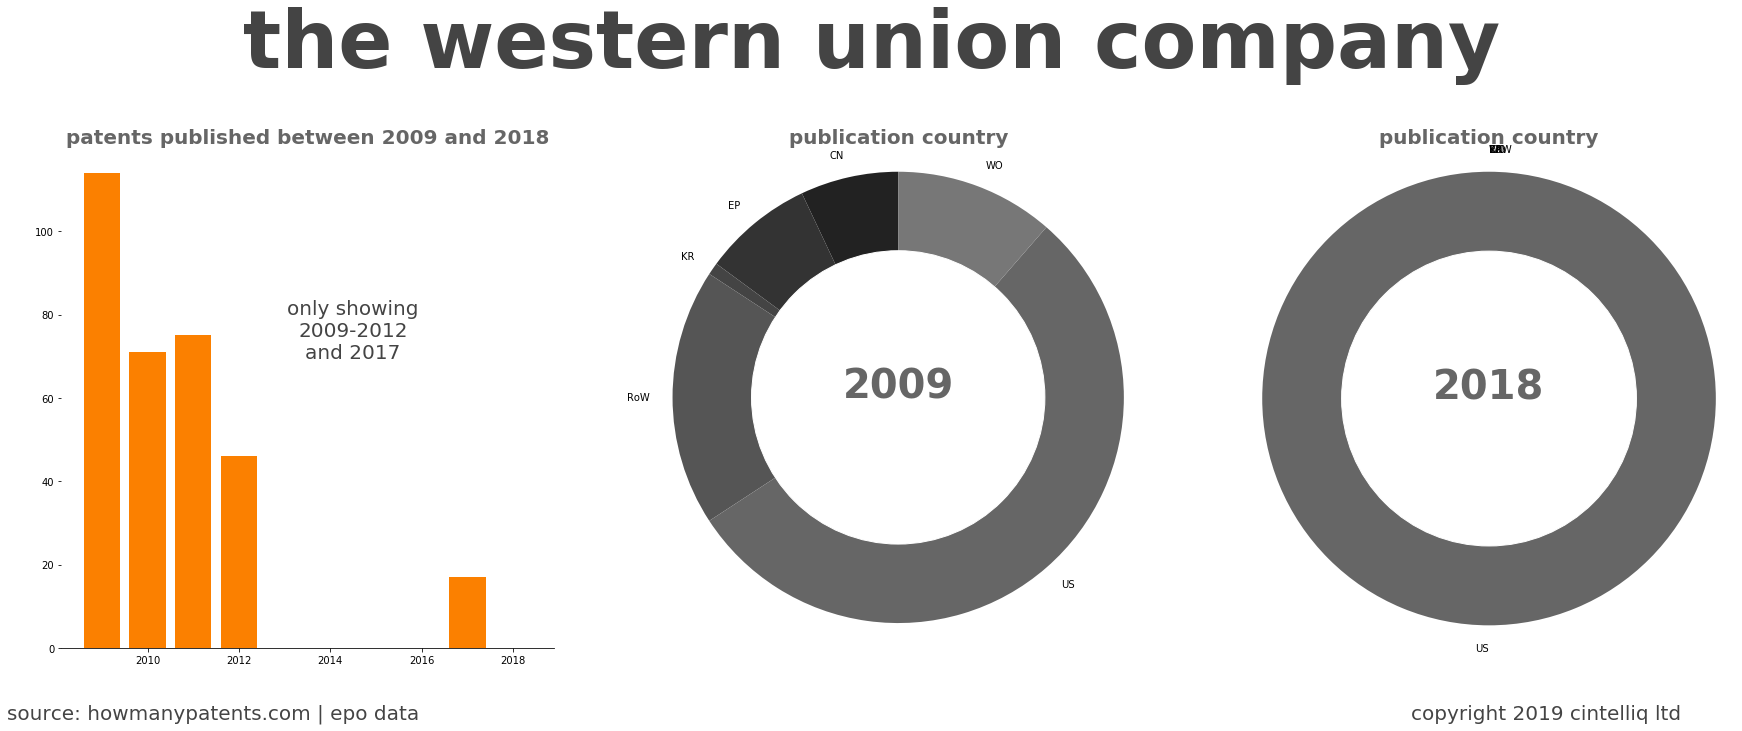 summary of patents for The Western Union Company